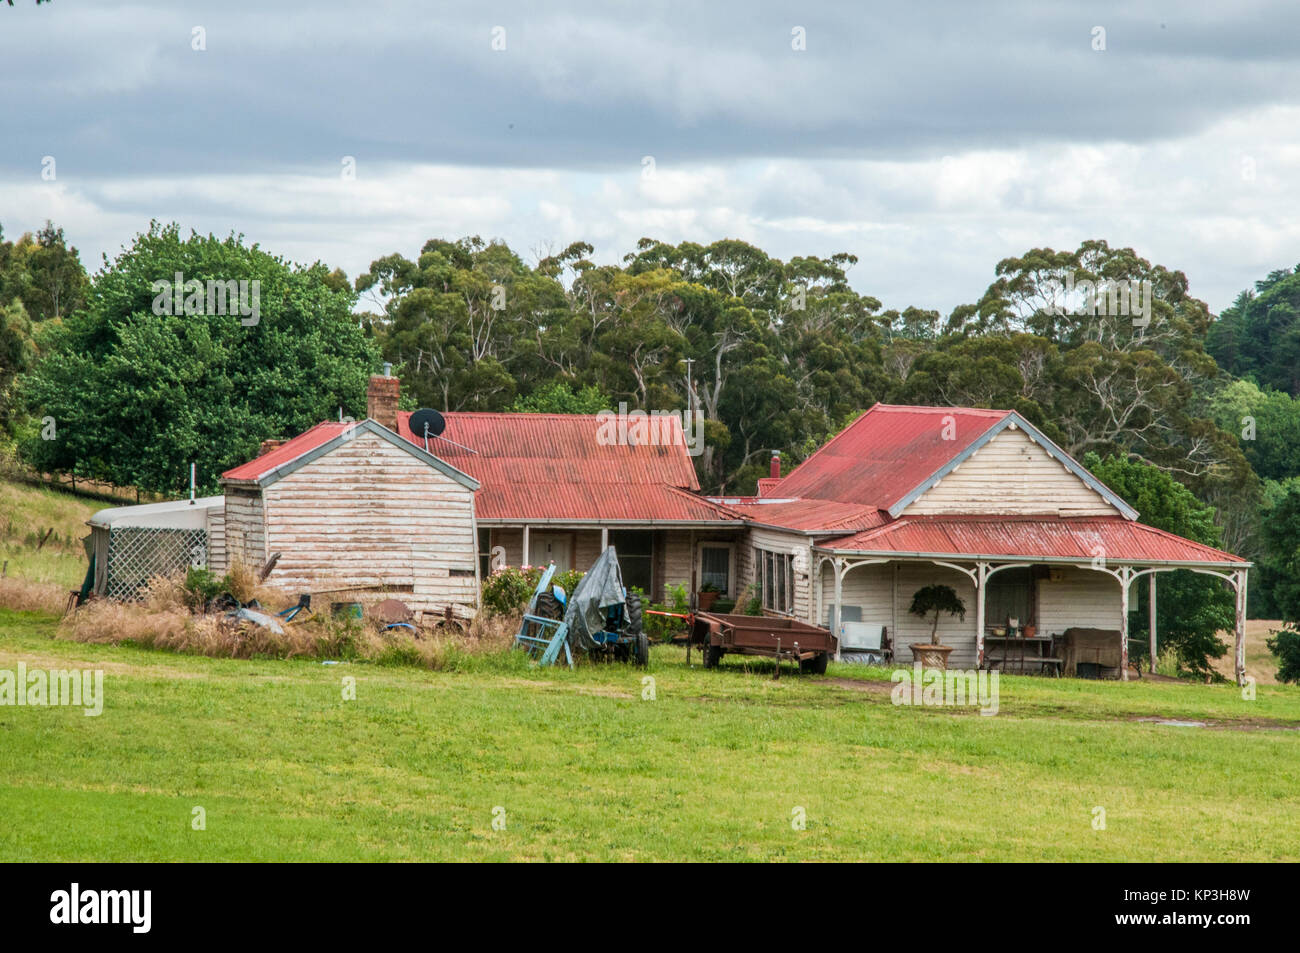 Rustic farmhouse outside Daylesford, a popular weekend destination in the Central Highlands goldfields of Victoria, Australia Stock Photo